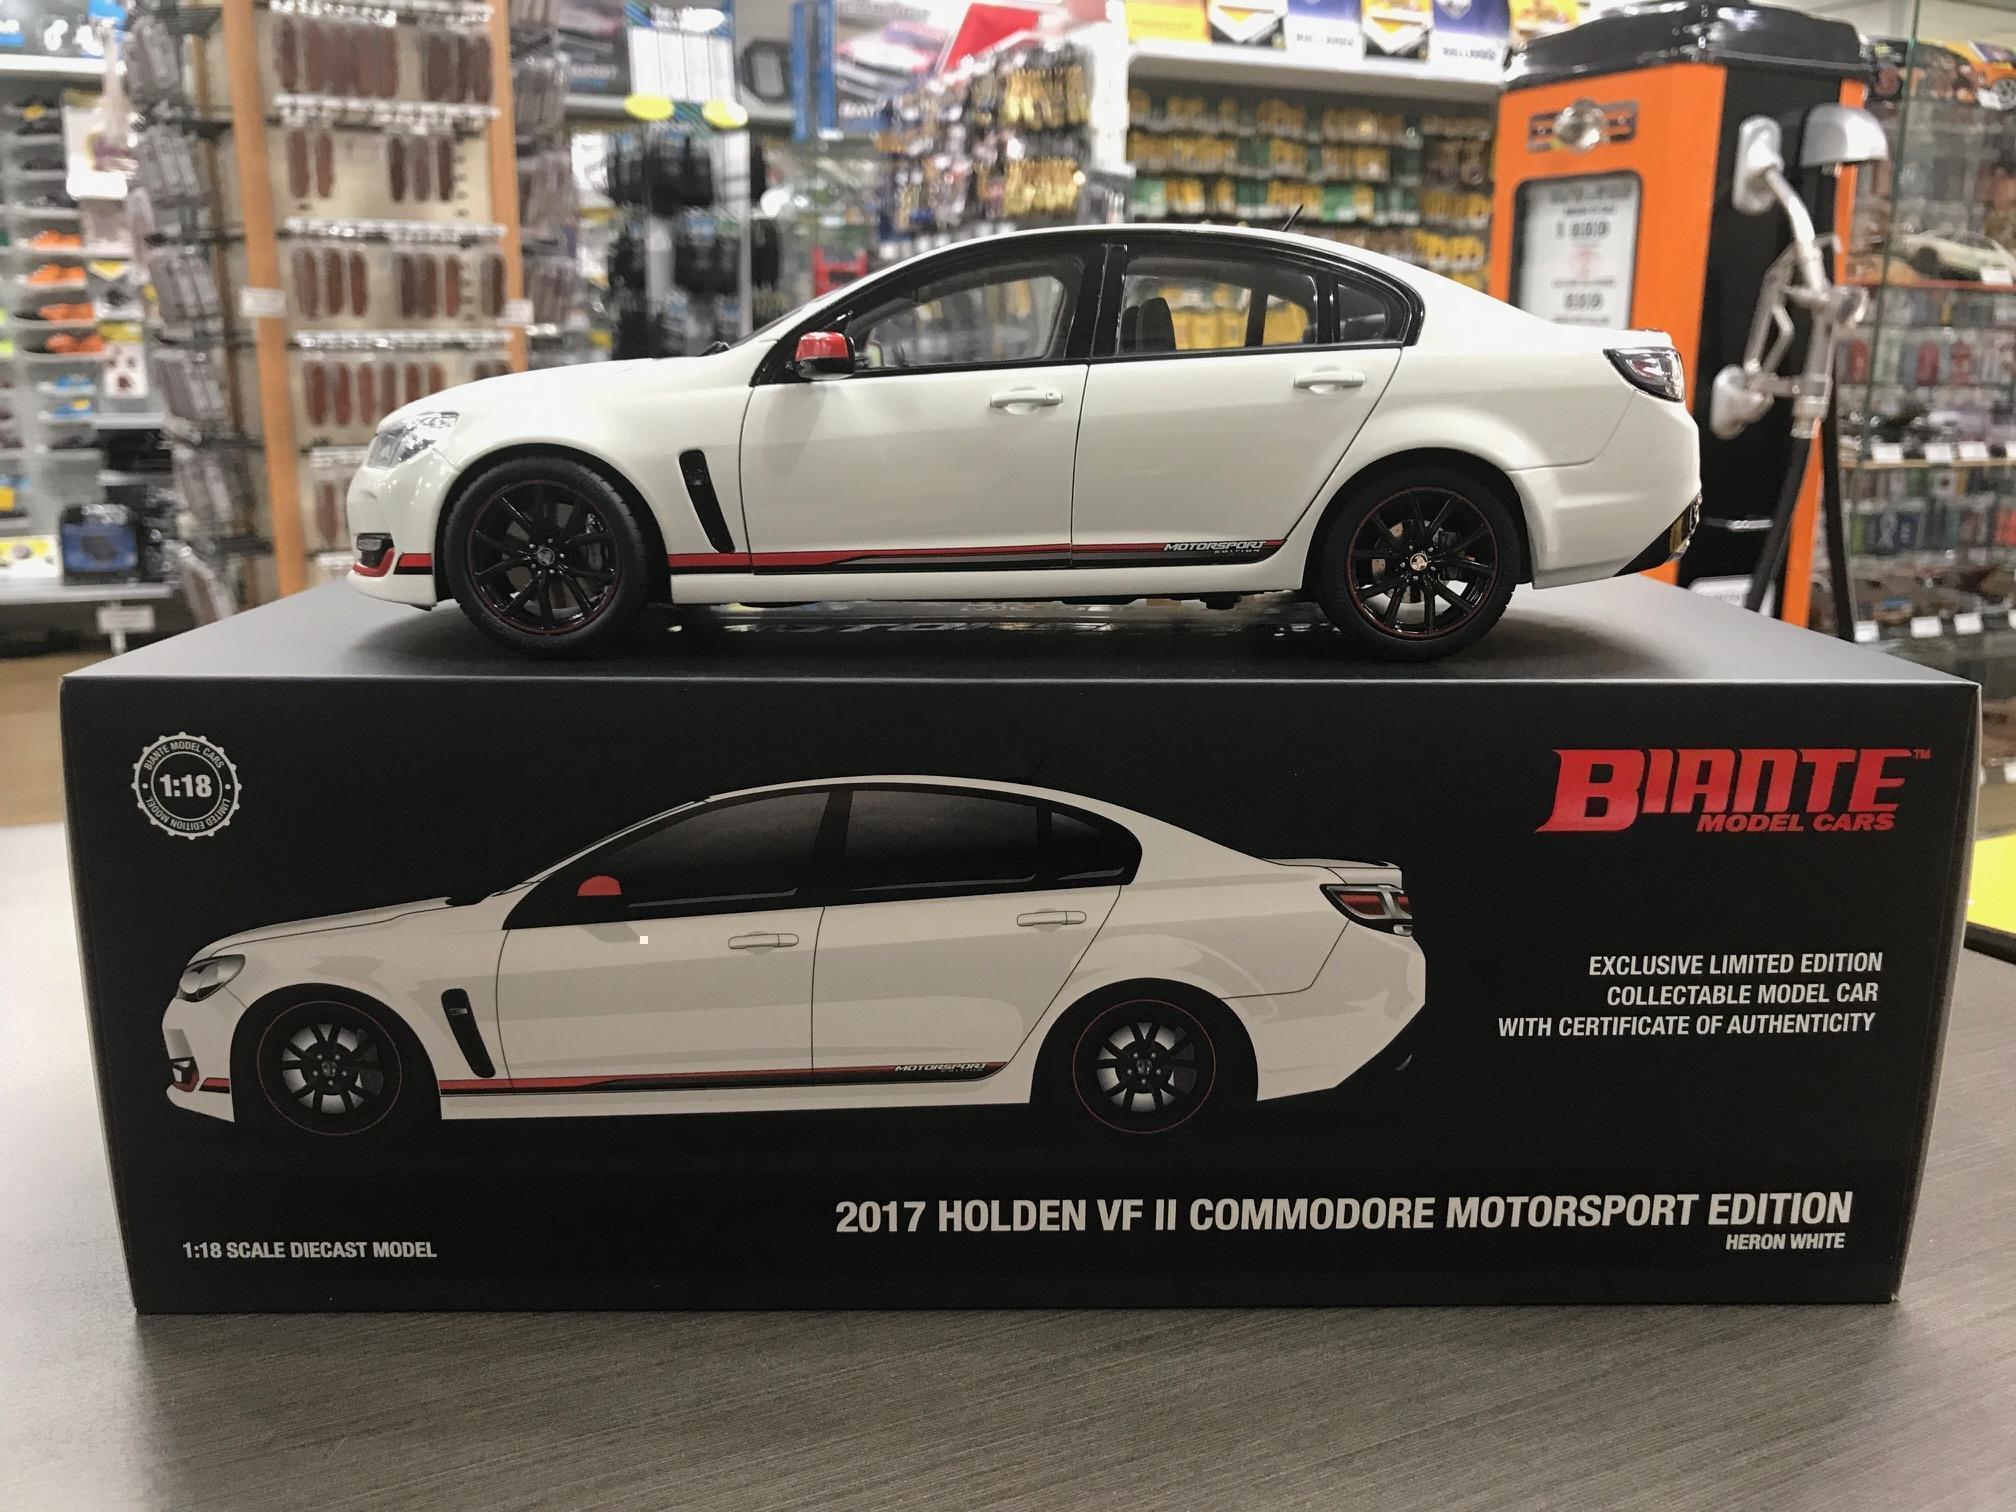 Holden VF Commodore Motorsport Edition 2017 Heron White 1:18 Die Cast Scale Model Car